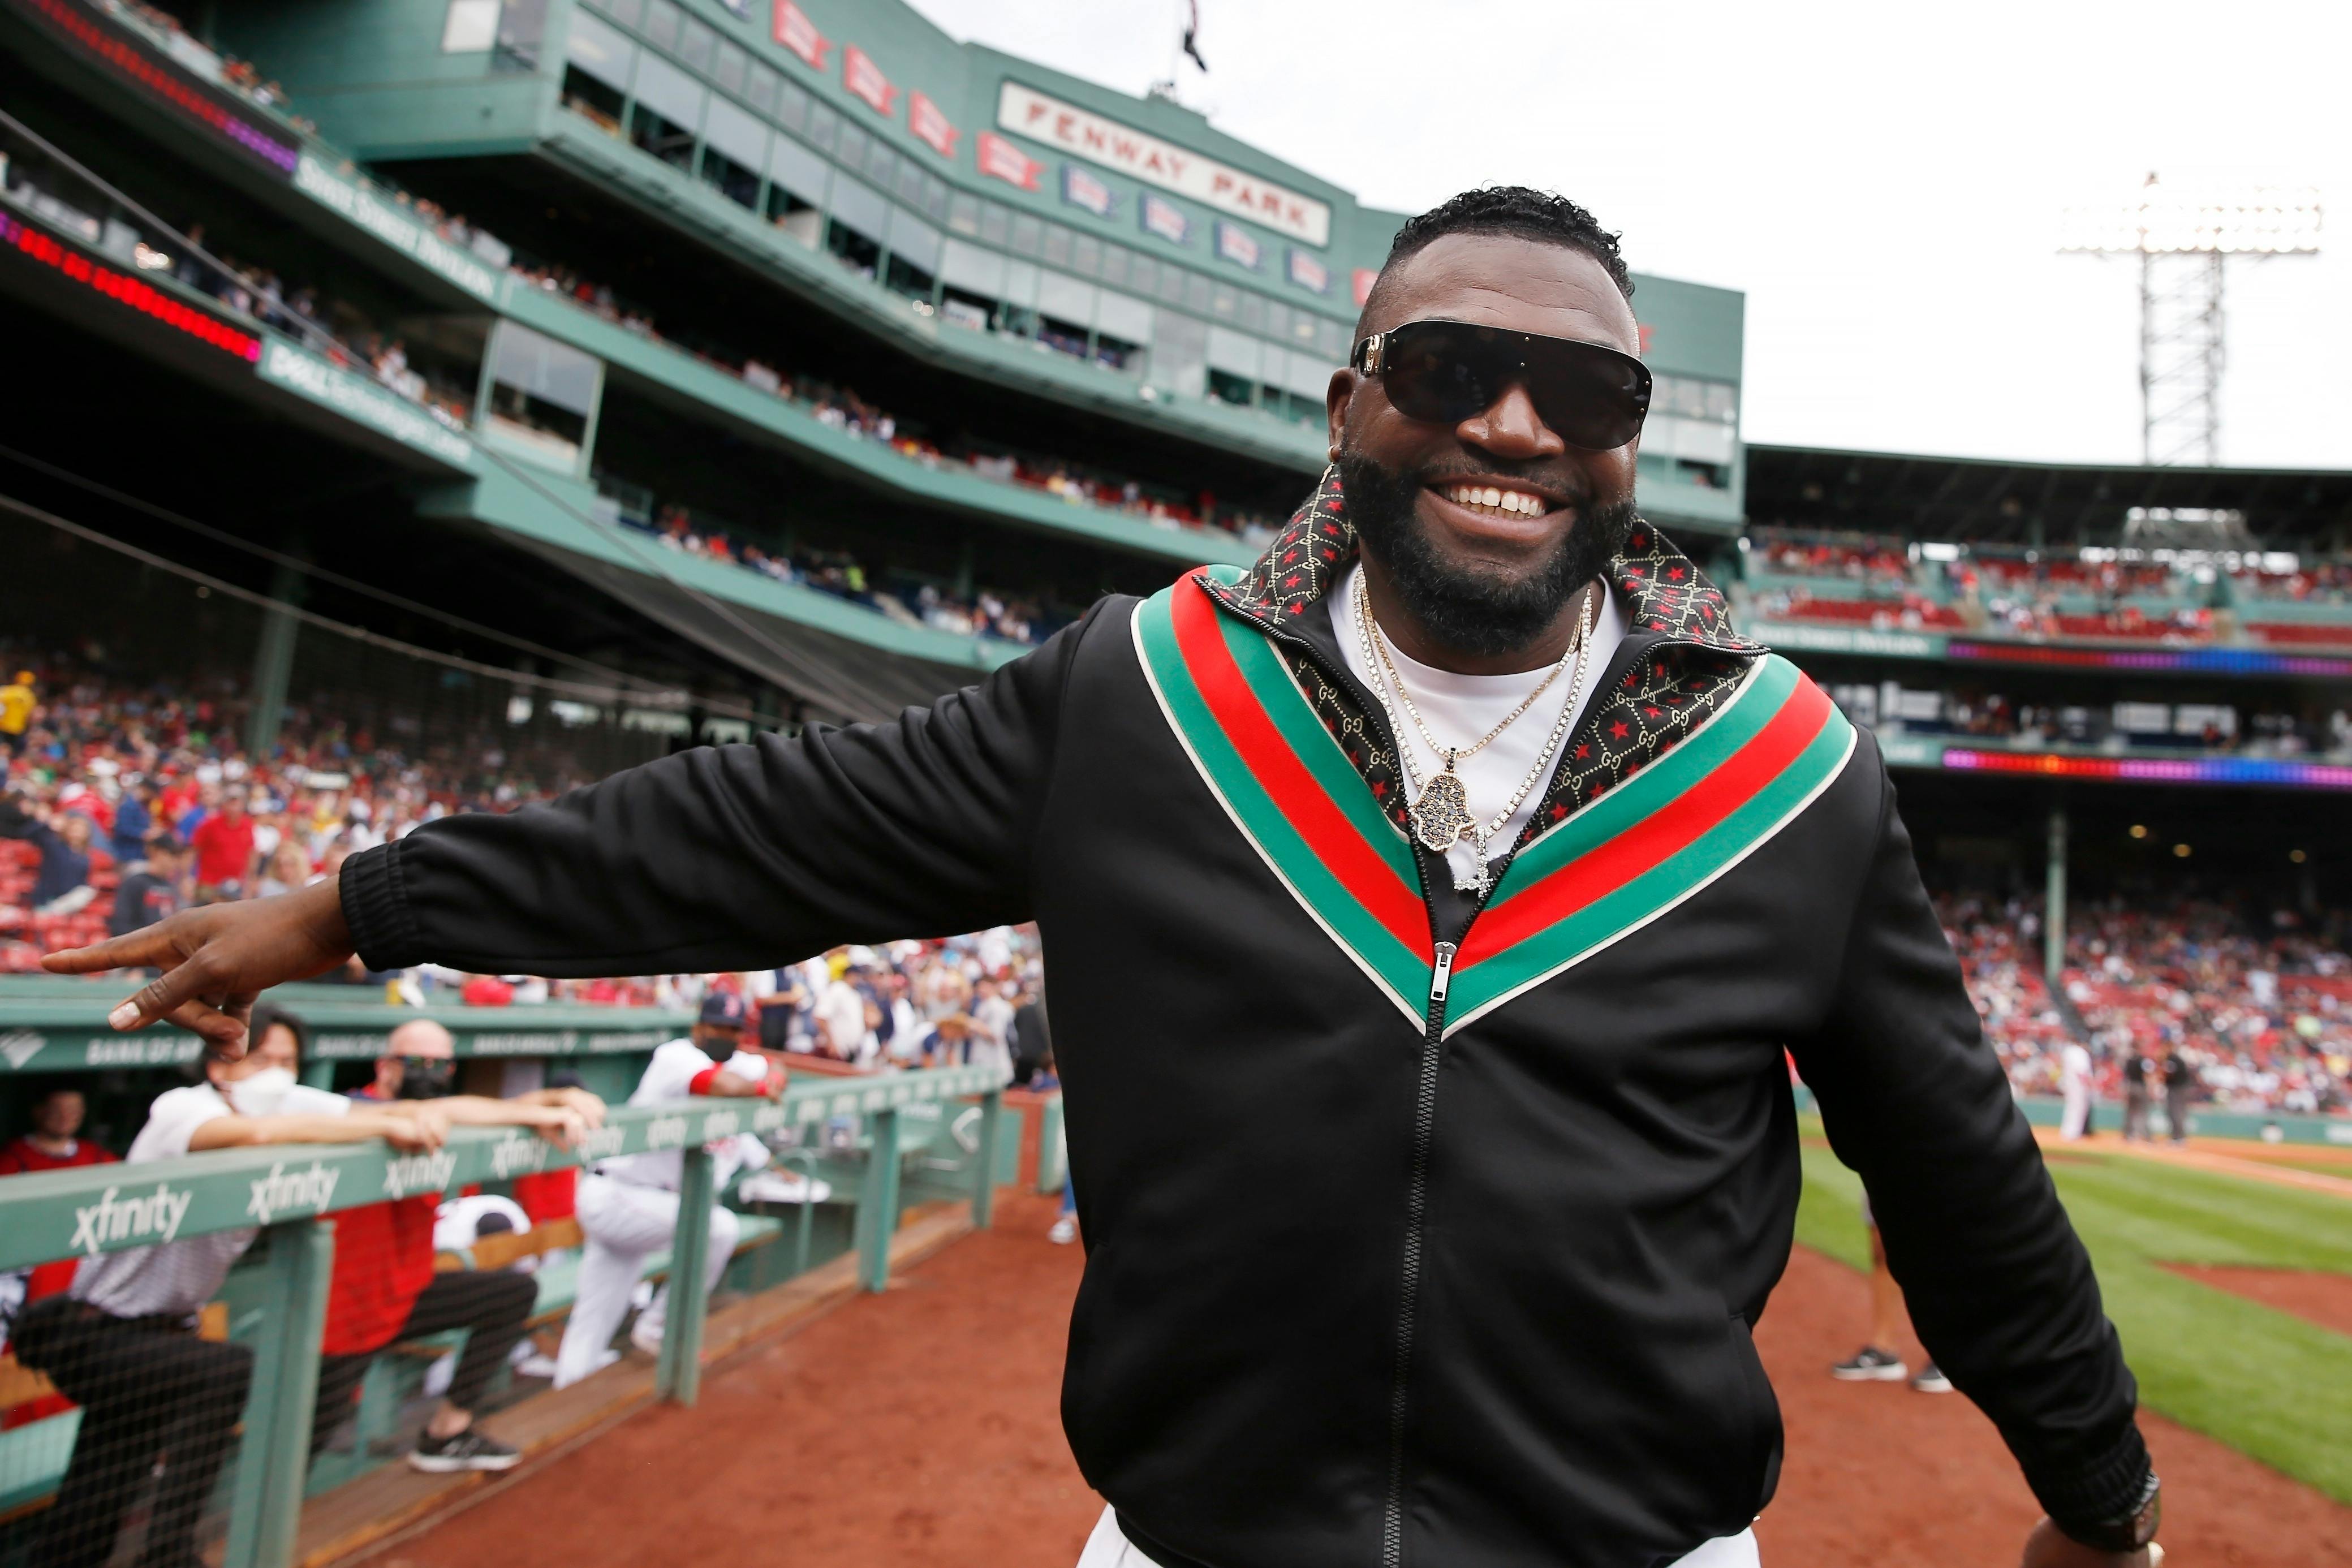 Former Boston Red Sox Hitter David ‘Big Papi’ Ortiz Inducted Into Baseball Hall of Fame